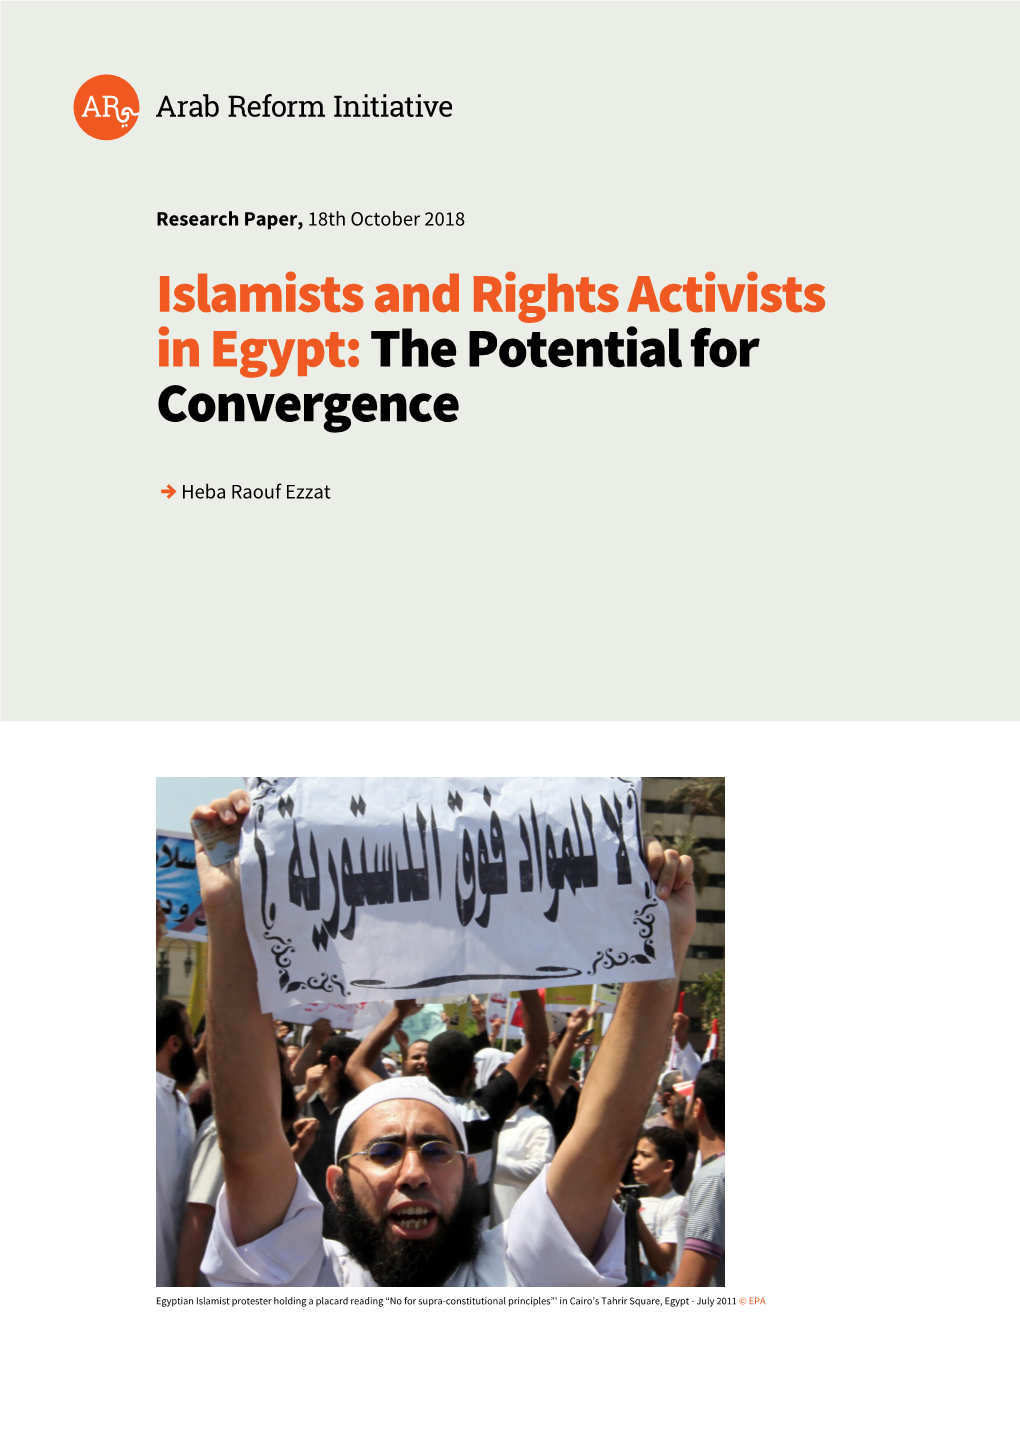 Islamists and Rights Activists in Egypt: the Potential for Convergence